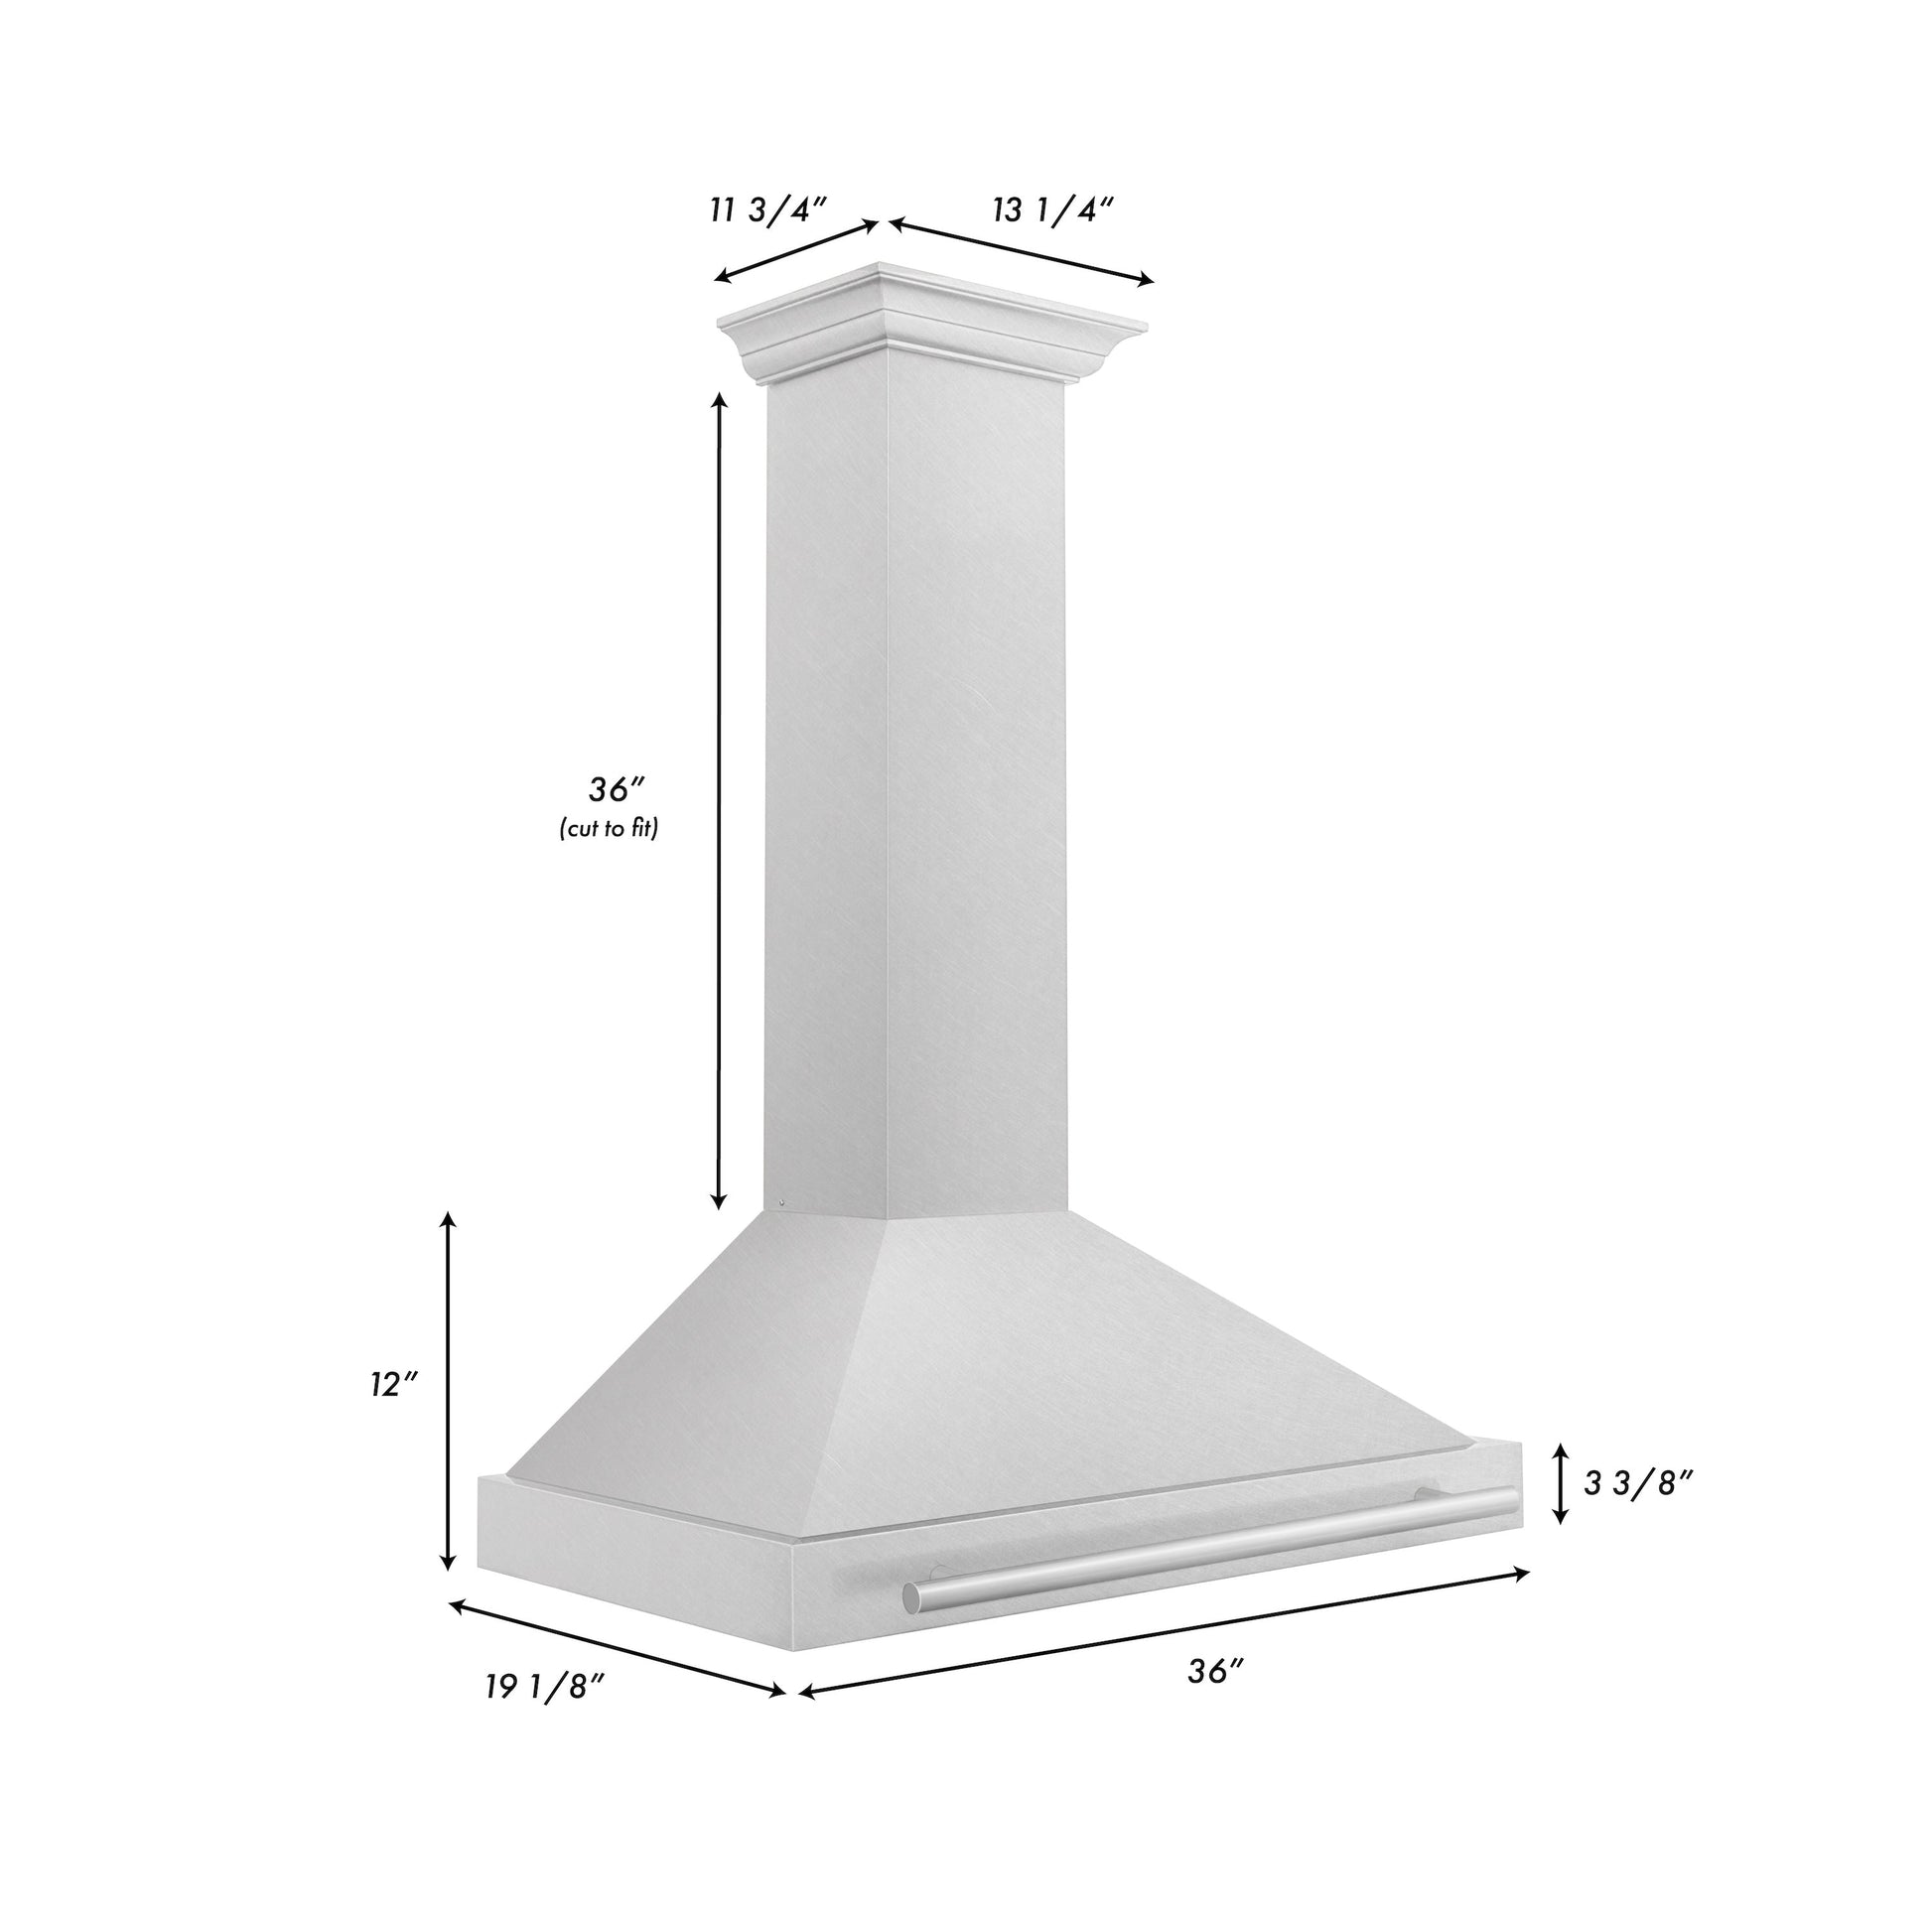 ZLINE 36" DuraSnow Stainless Steel Range Hood - Stainless Steel Handle with Colored Shell Options